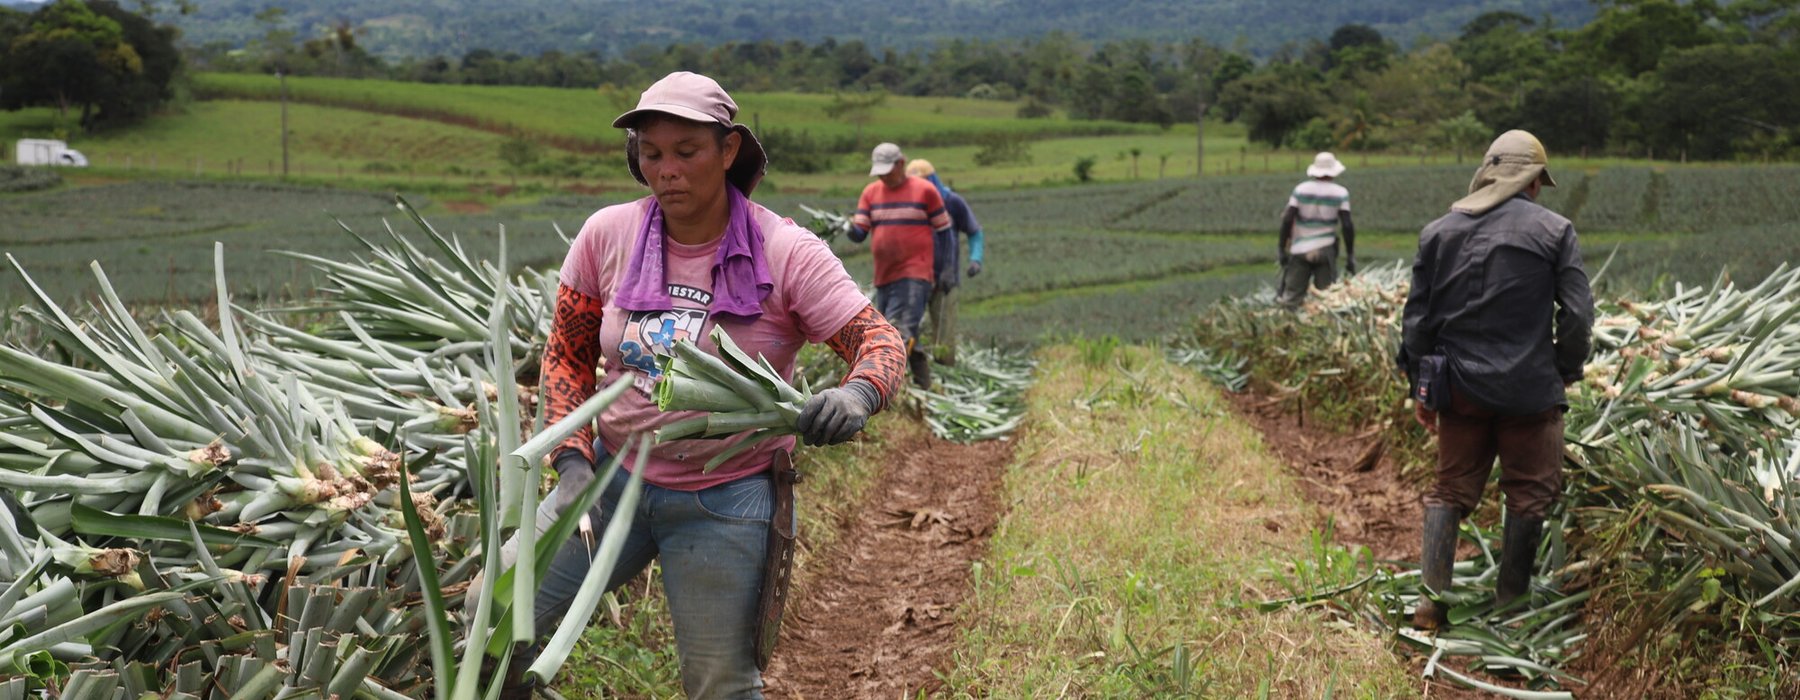 Pineapple workers in Costa Rica